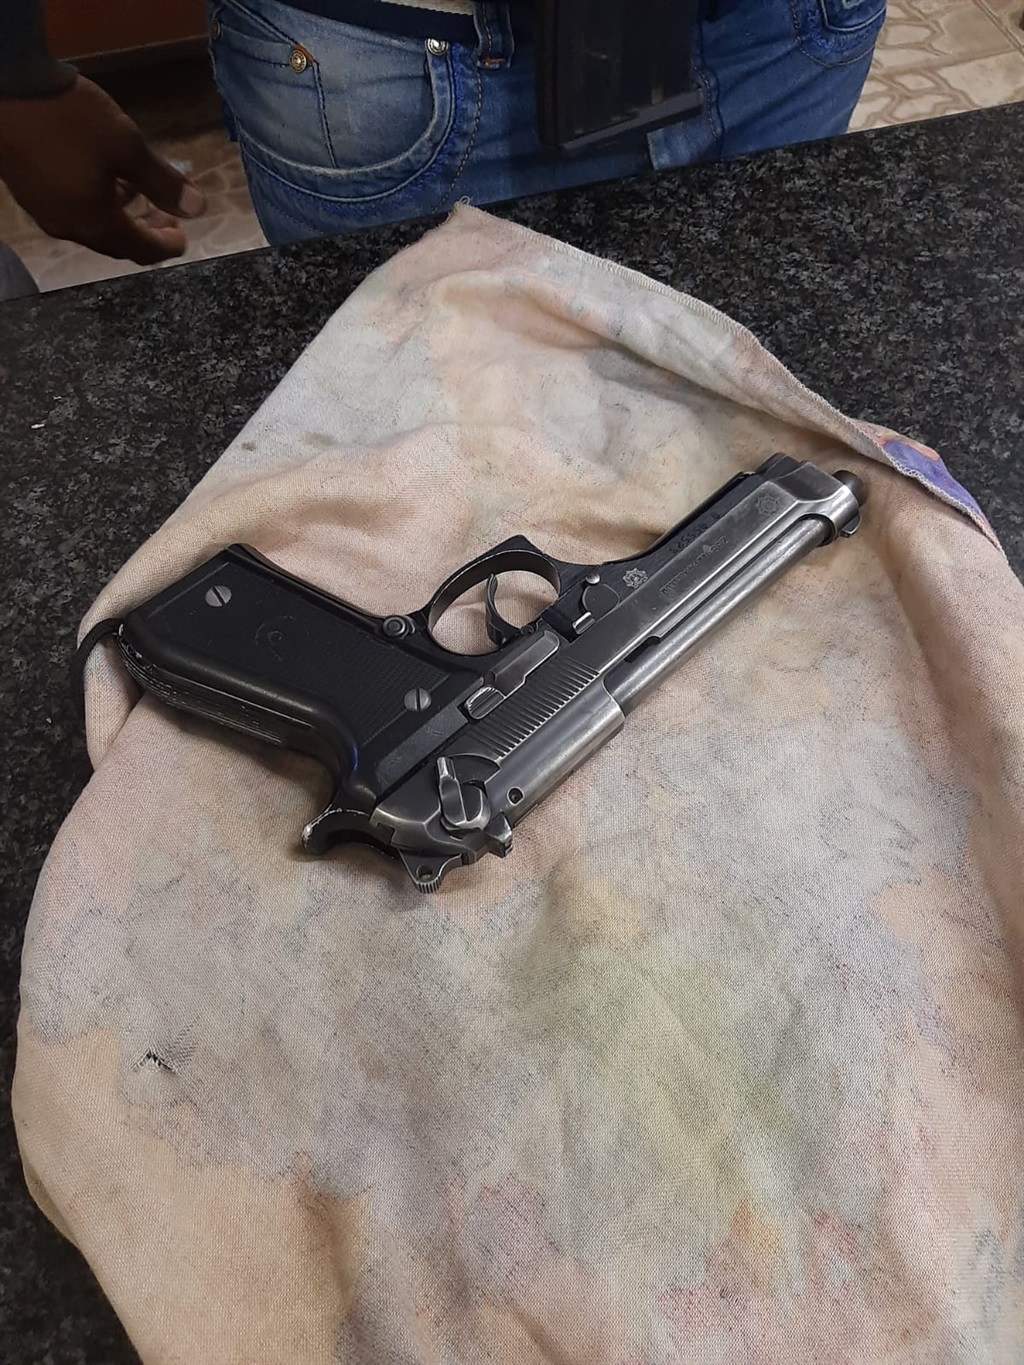 Police found a gun among other weapons